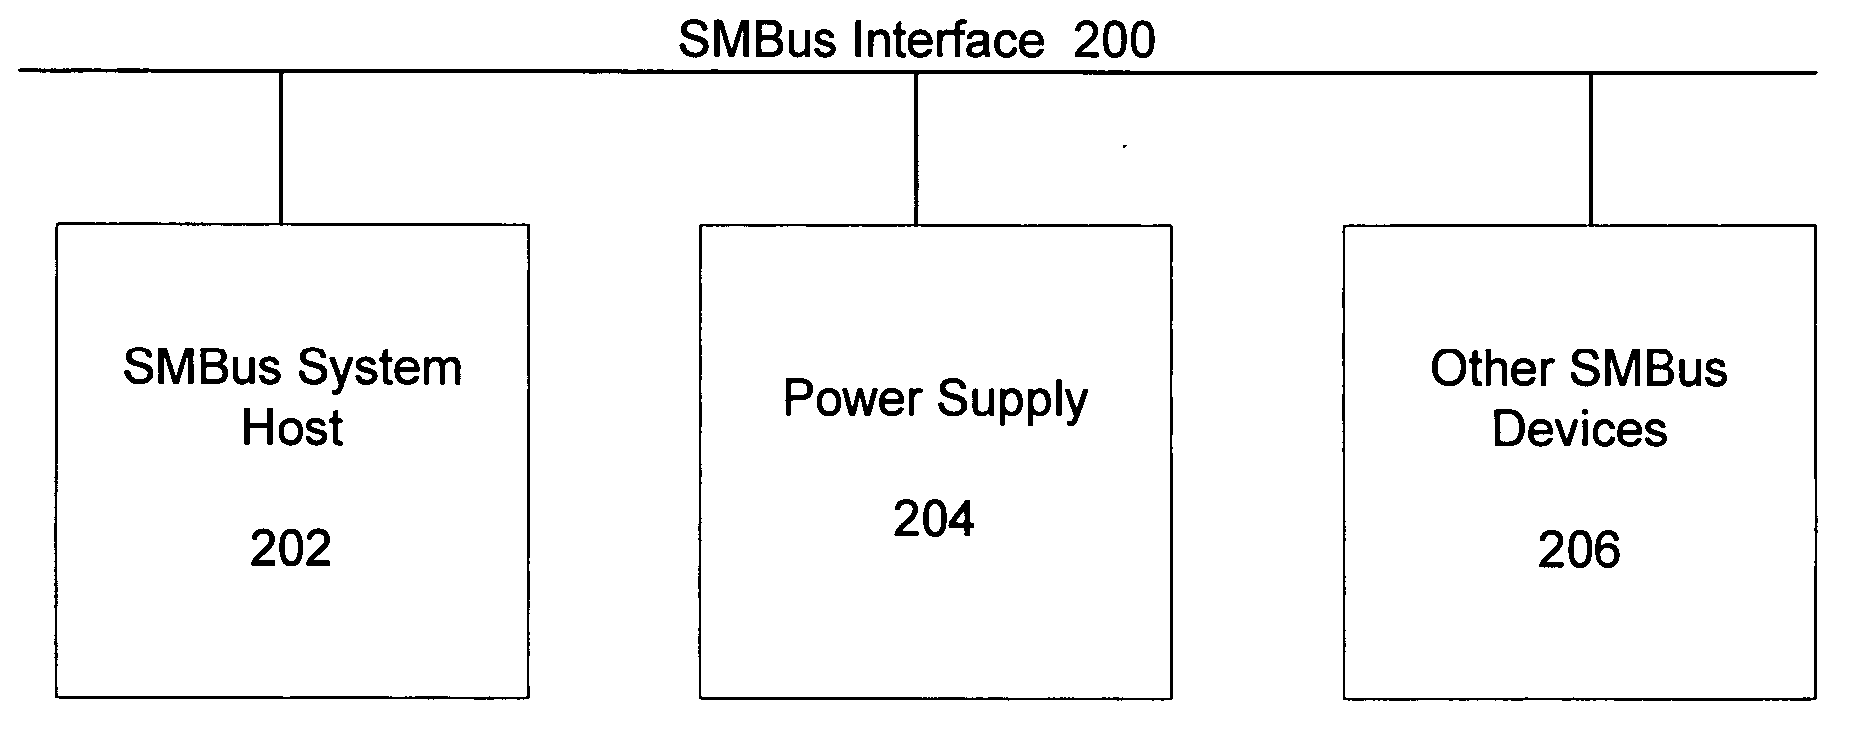 Method for making power supplies smaller and more efficient for high-power PCs